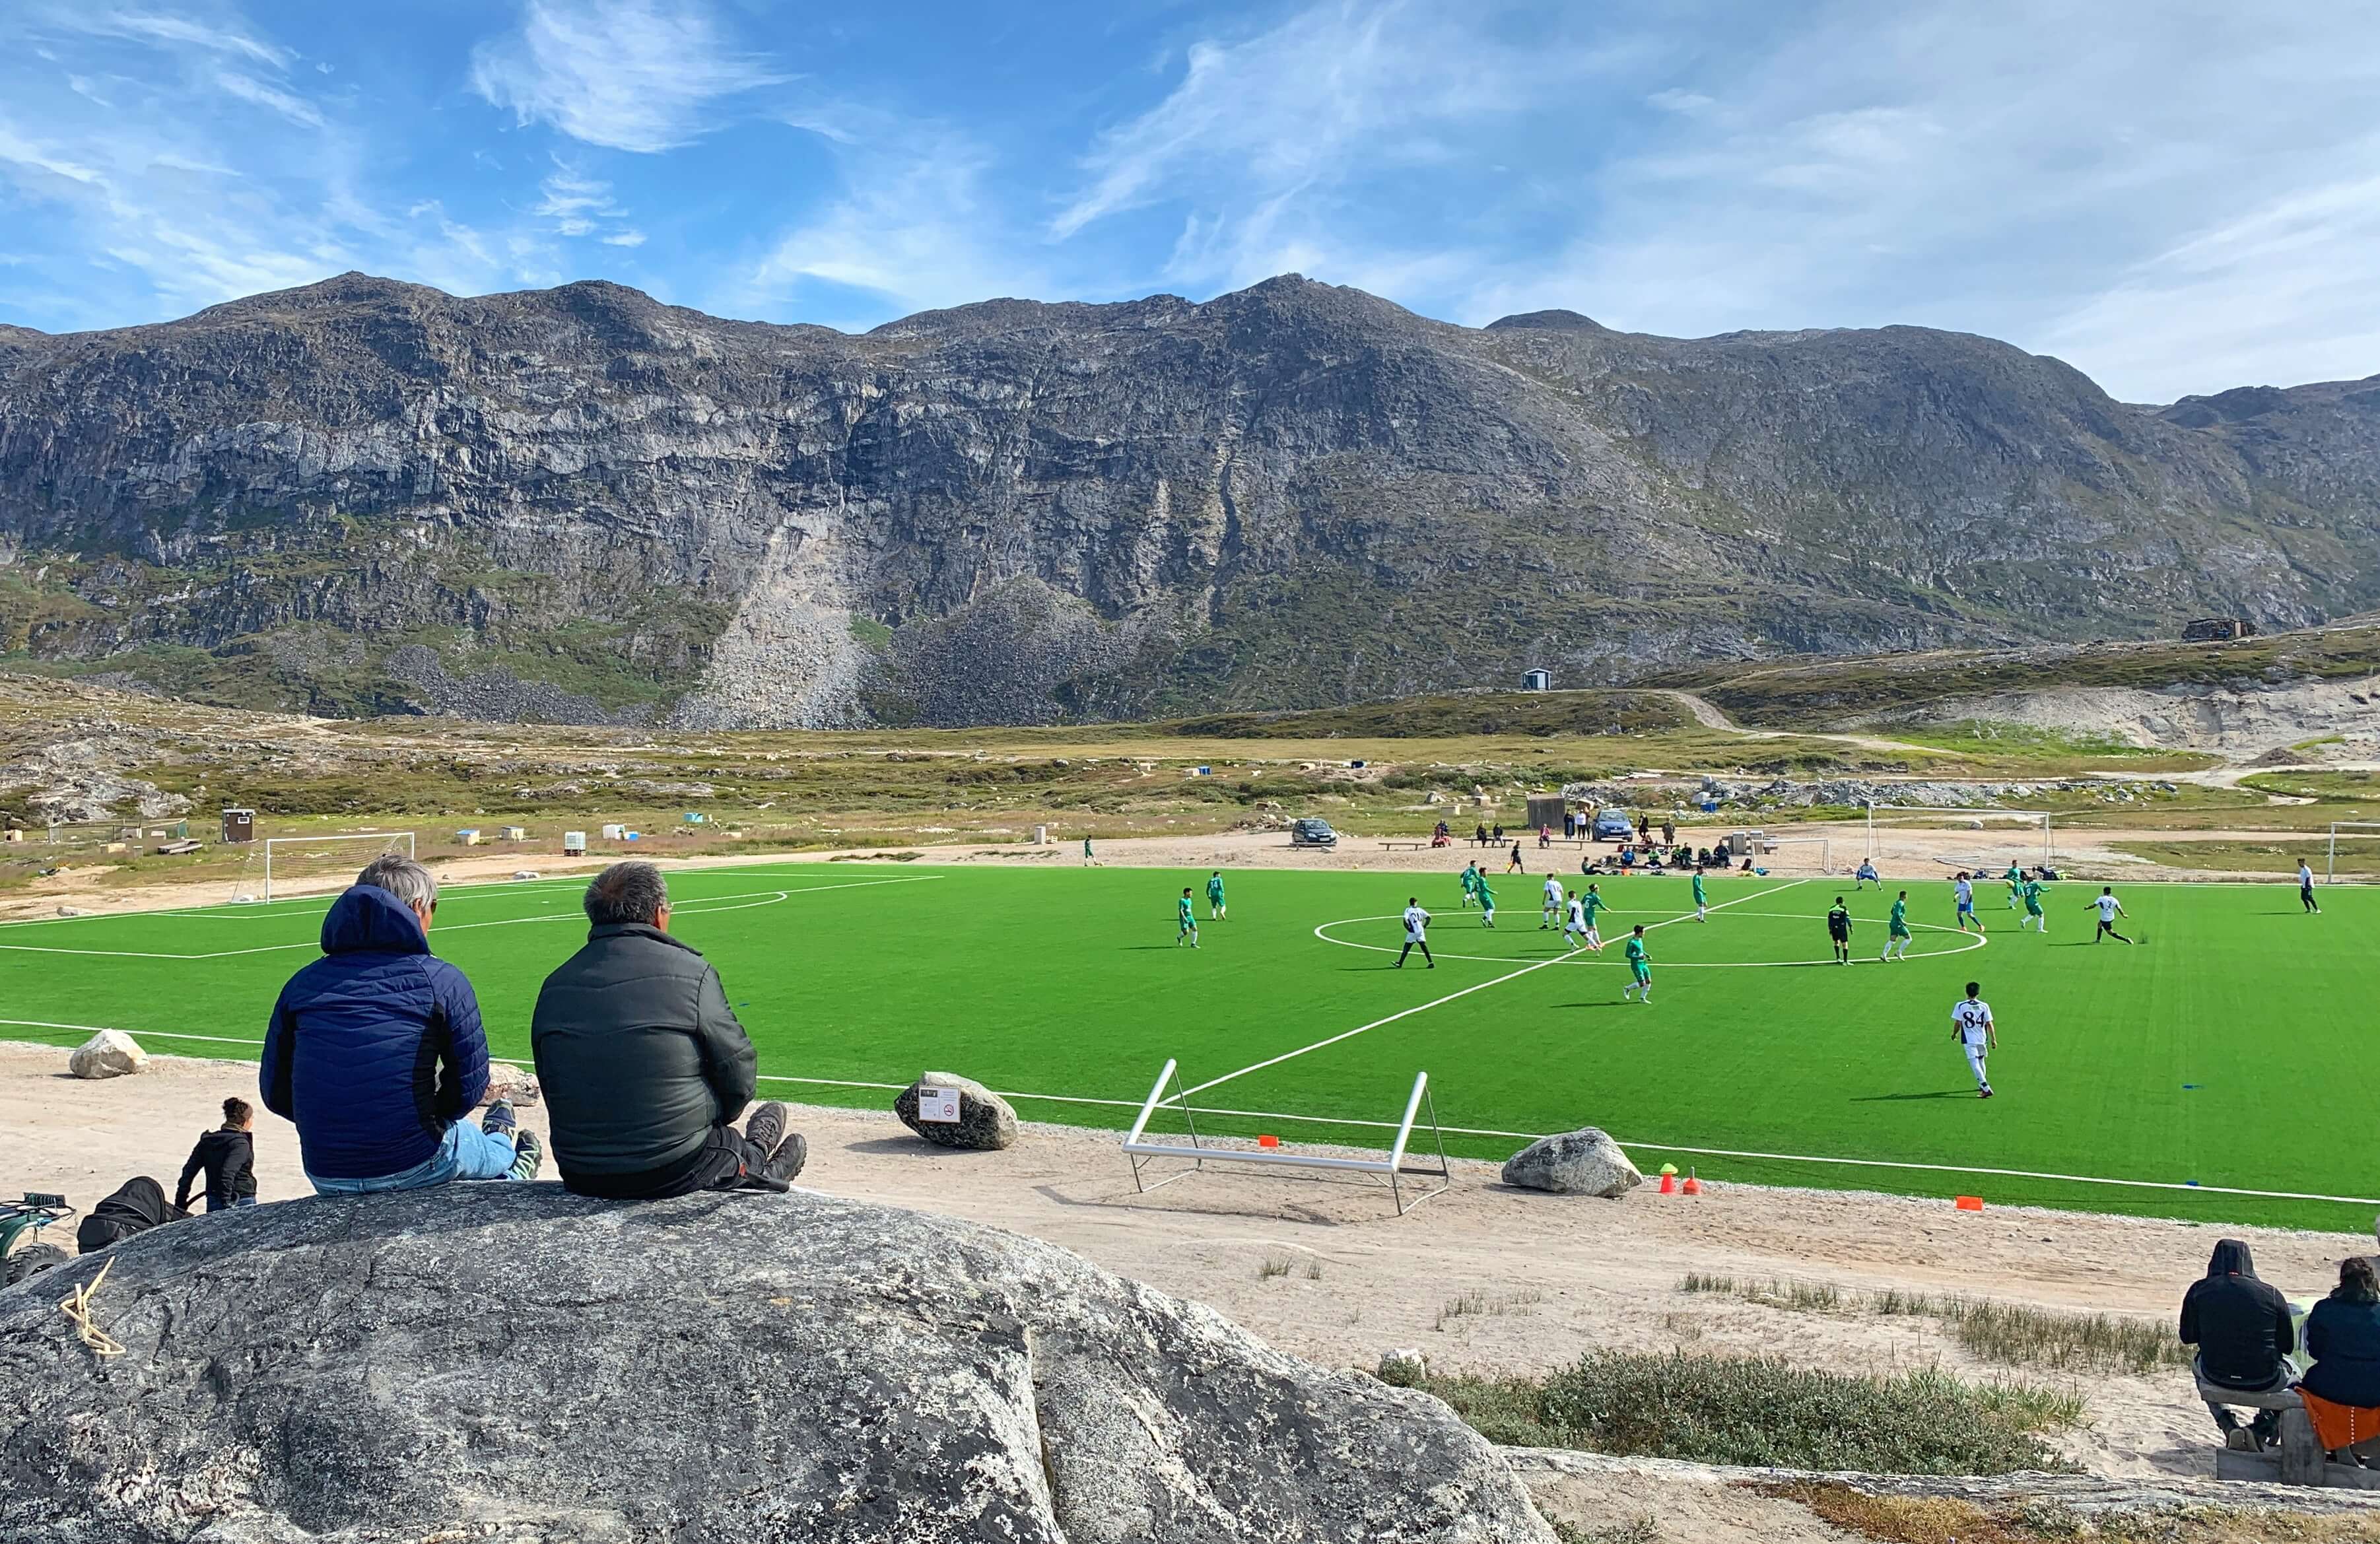 Two people sitting on a rock watching a soccer game. Photo by Espen Andersen, Visit Greenland